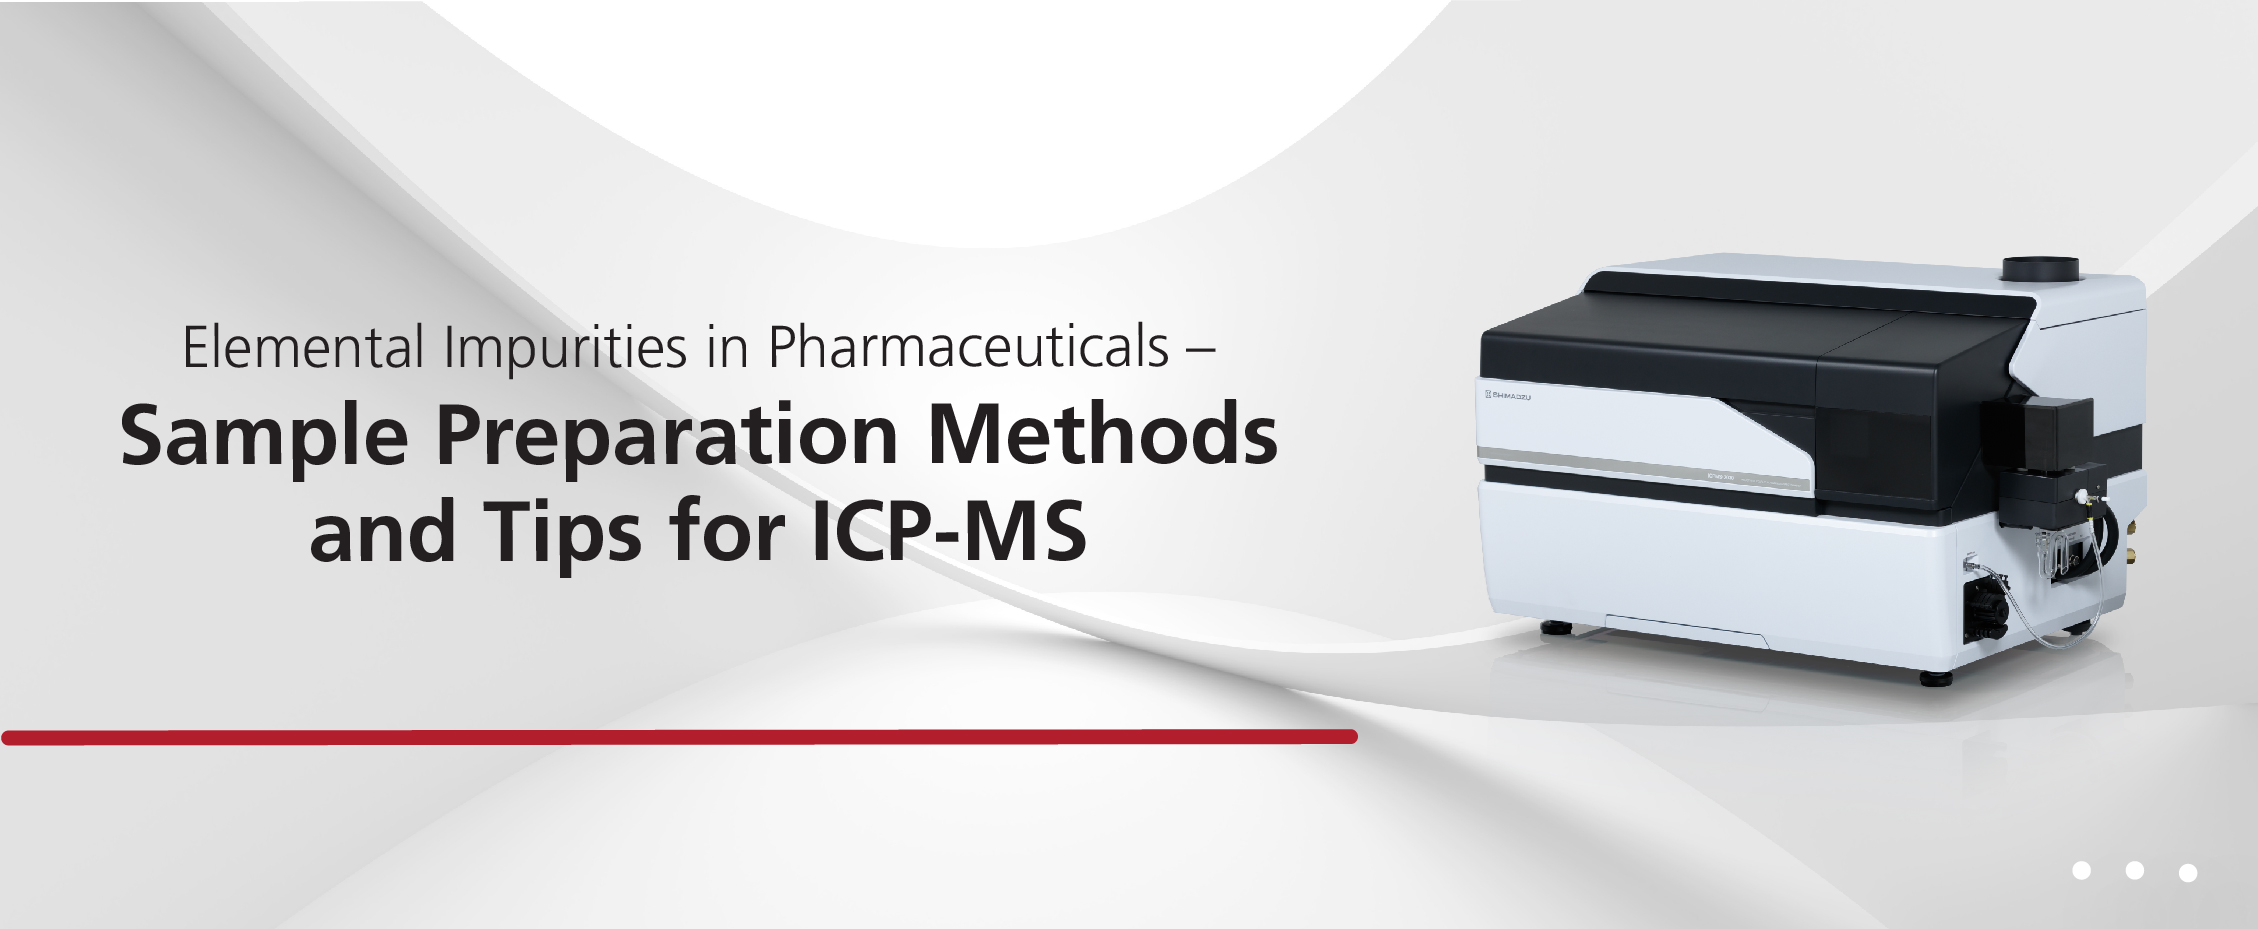 Elemental Impurities in Pharmaceuticals, Sample Preparation Methods and Tips for ICP-MS